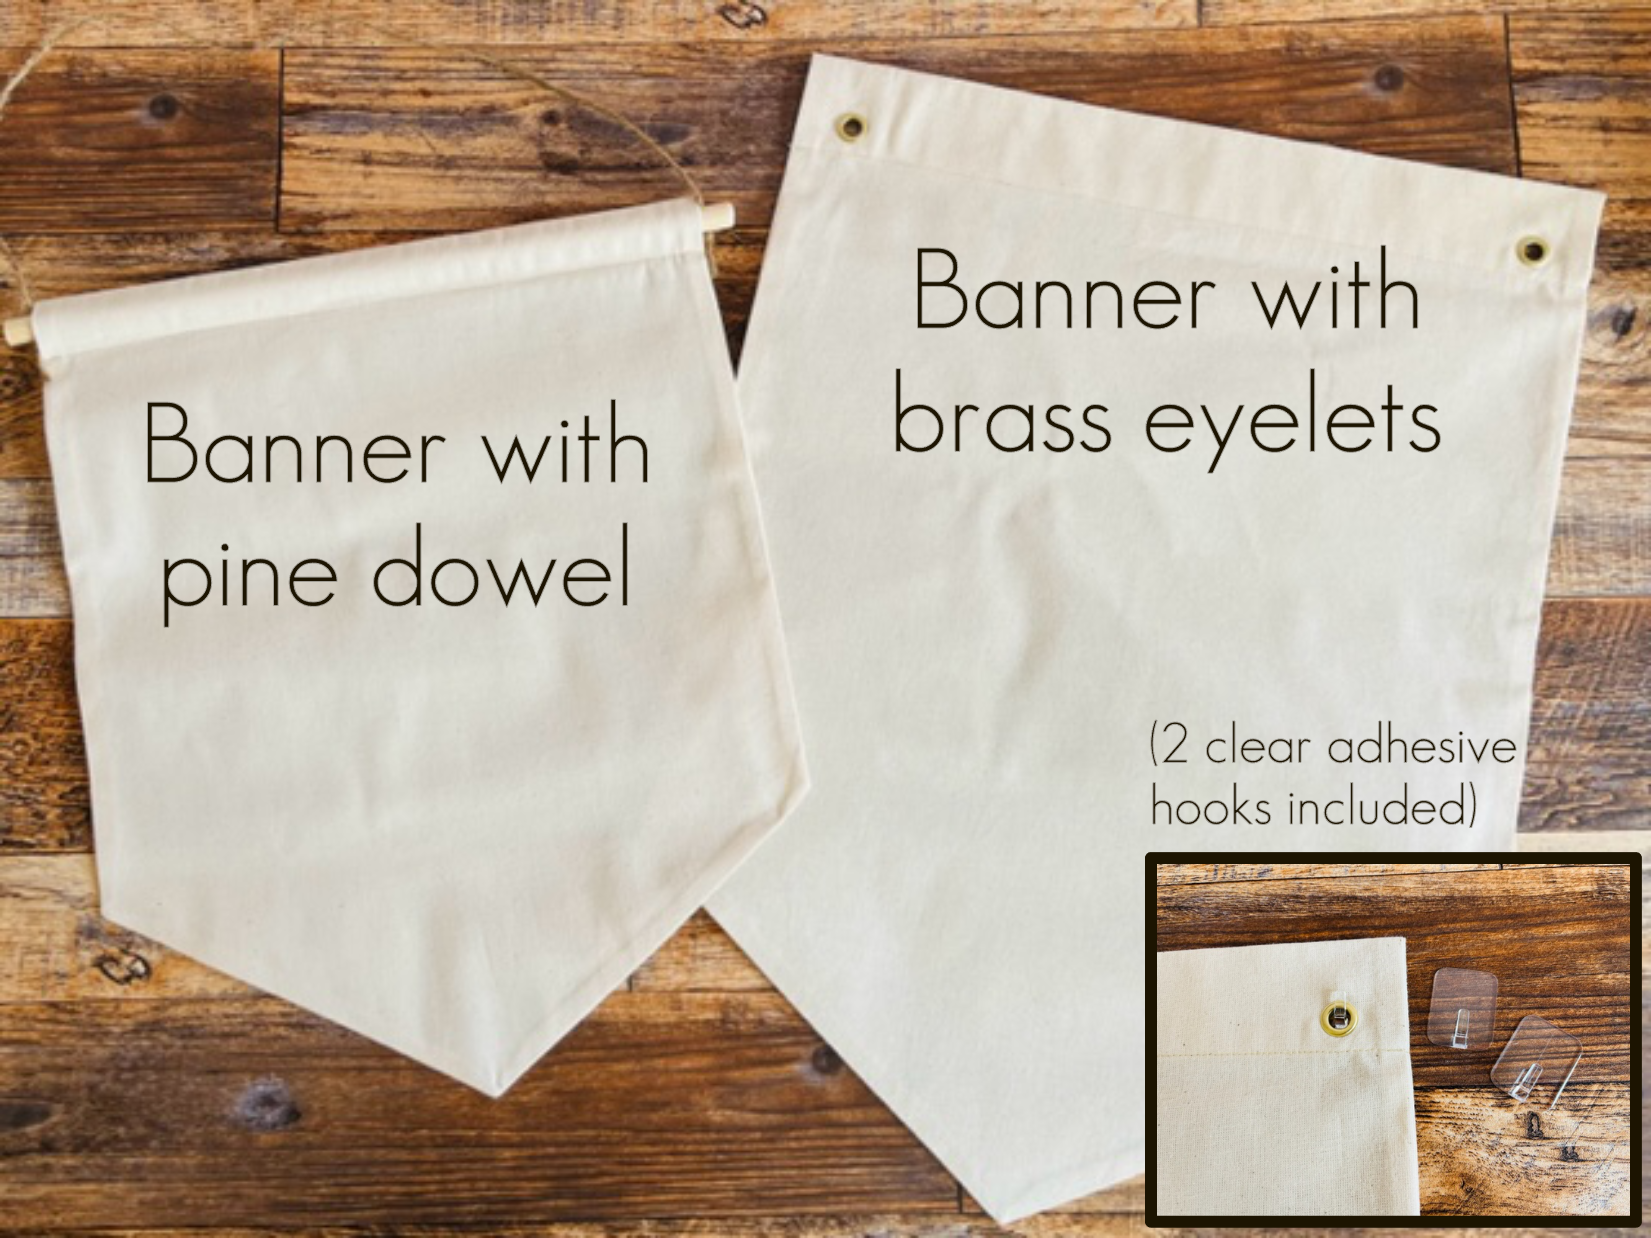 two plain canvas banners - one shown with pine dowel and the other has brass eyelets